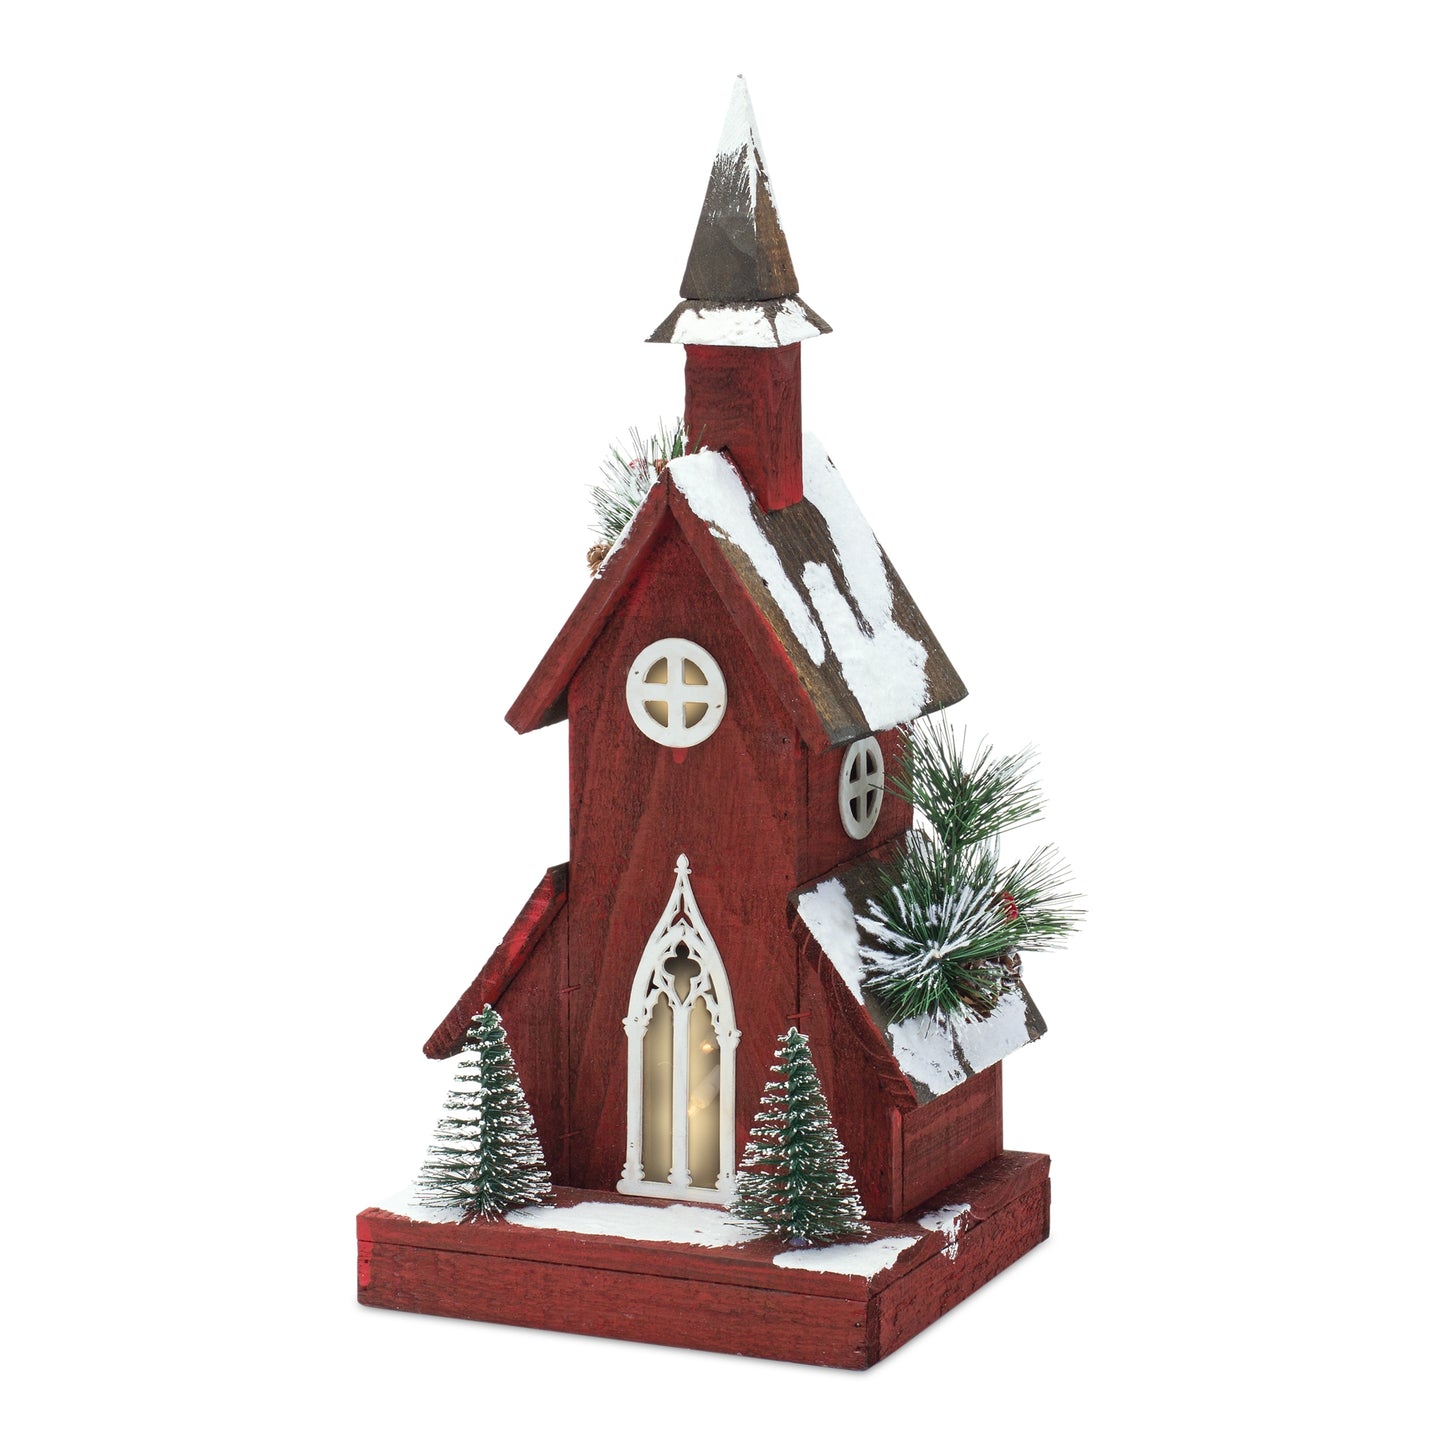 Lighted Winter Church Display with Pine Accents and Snowy Finish 19"H